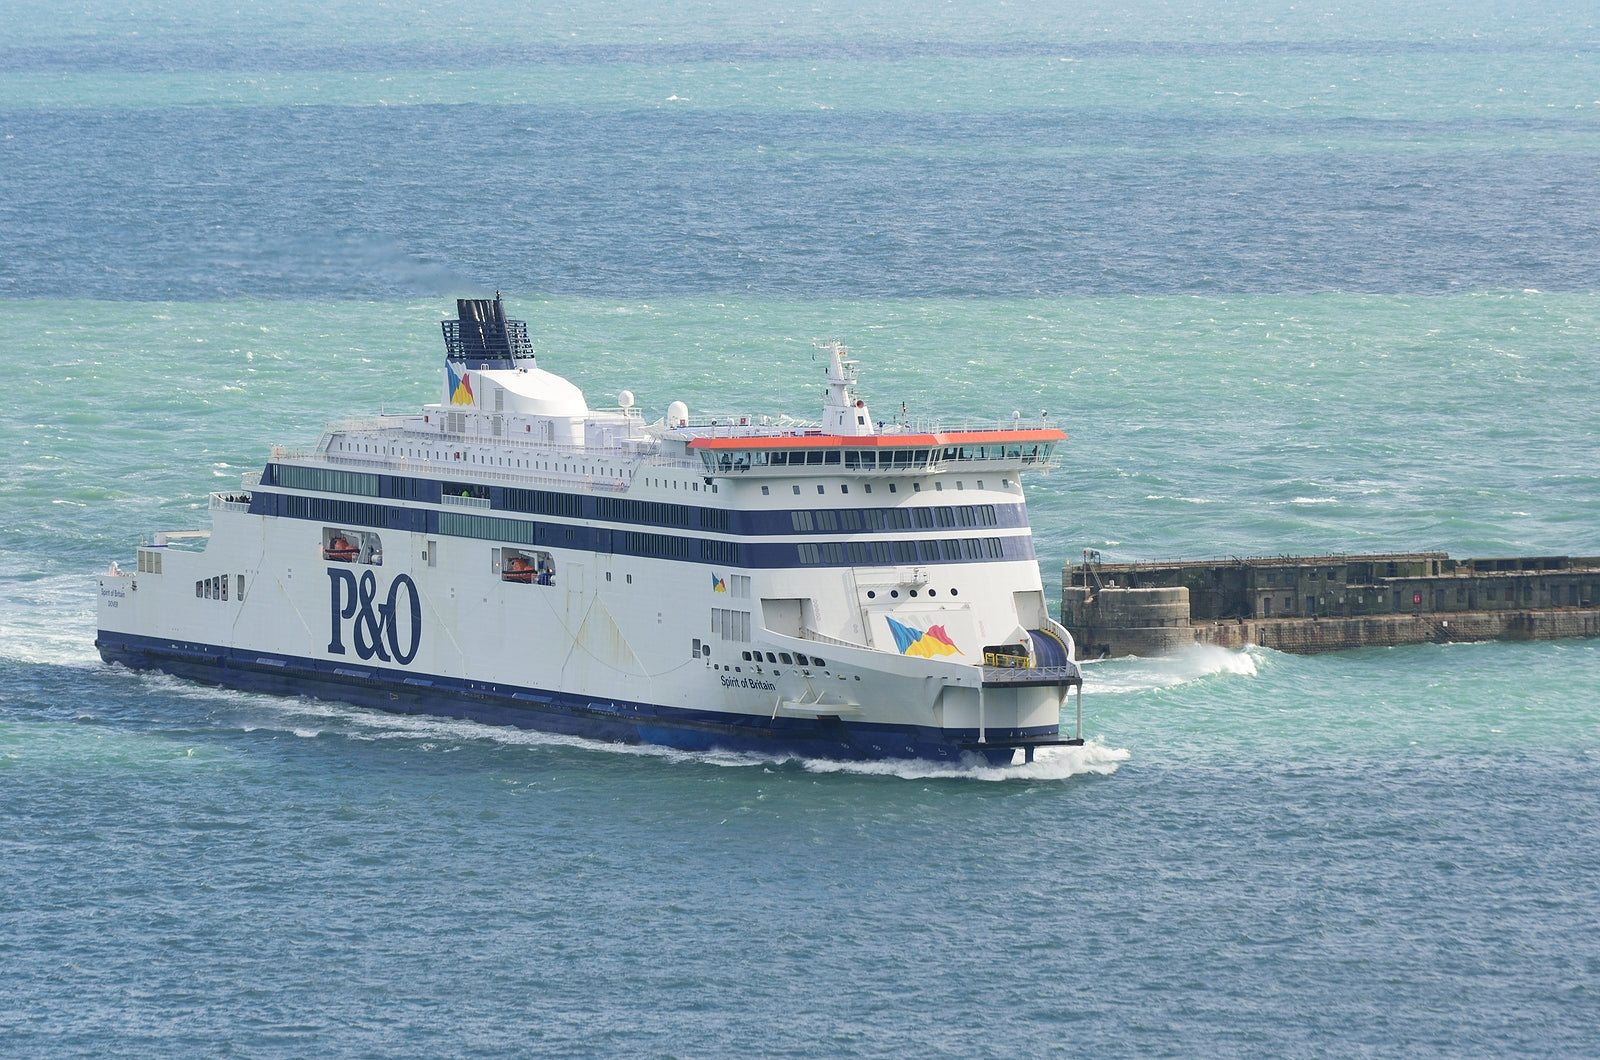 [UK] Ministers have ‘done nothing’ to prevent repeat of P&O Ferries scandal